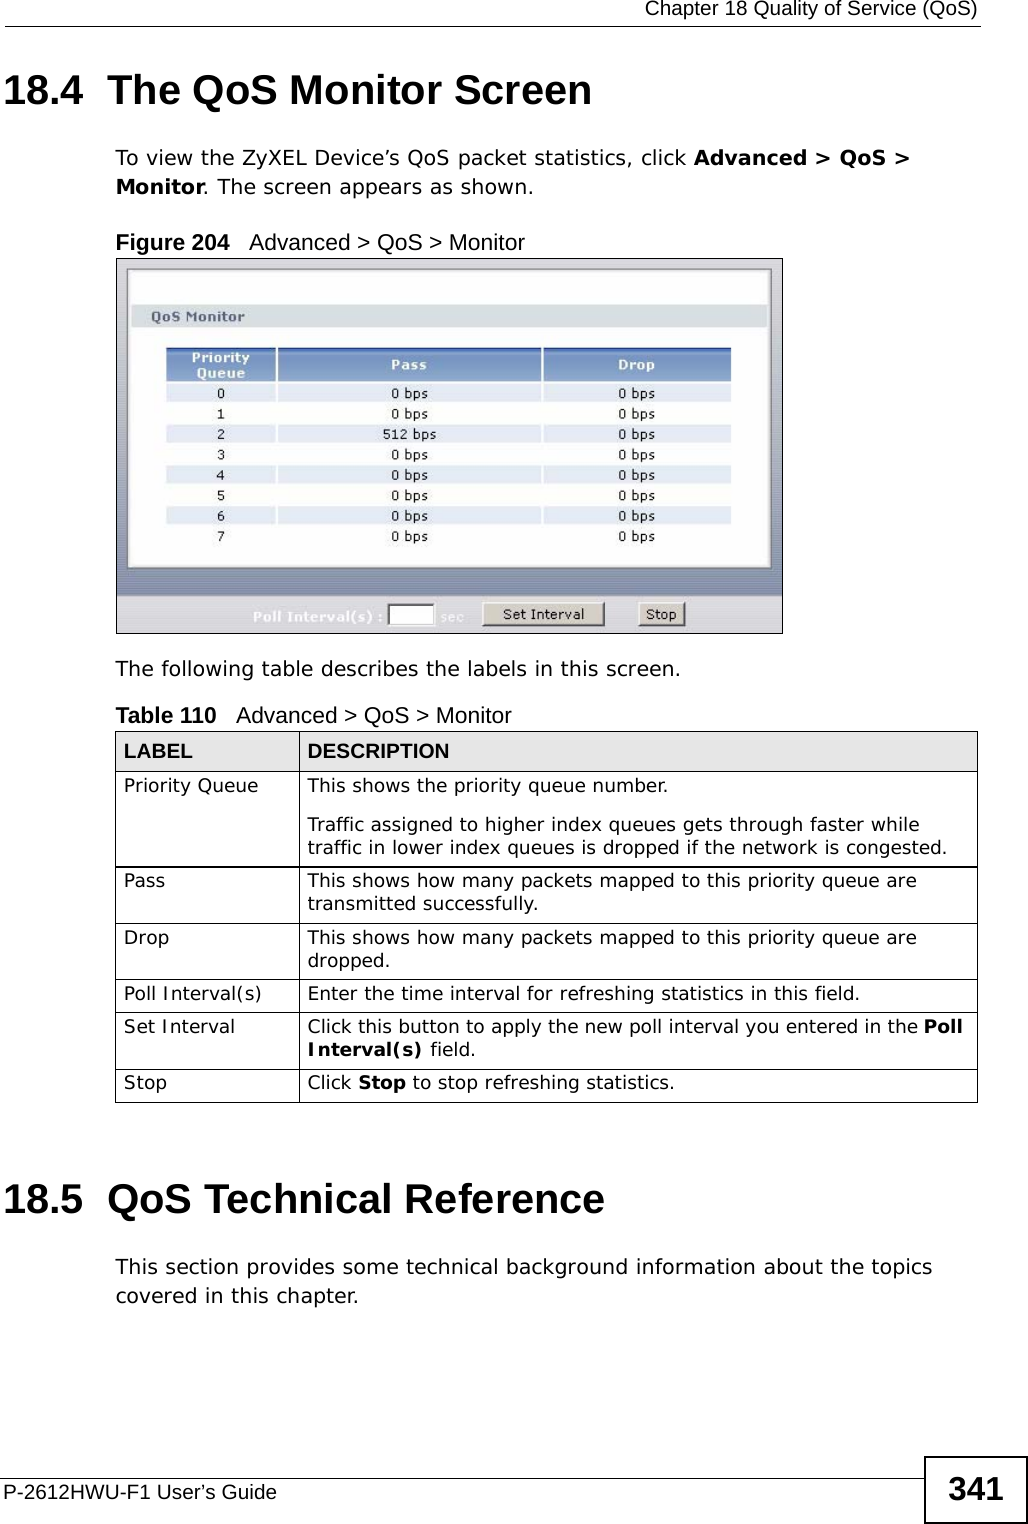  Chapter 18 Quality of Service (QoS)P-2612HWU-F1 User’s Guide 34118.4  The QoS Monitor Screen To view the ZyXEL Device’s QoS packet statistics, click Advanced &gt; QoS &gt; Monitor. The screen appears as shown. Figure 204   Advanced &gt; QoS &gt; Monitor The following table describes the labels in this screen.  18.5  QoS Technical ReferenceThis section provides some technical background information about the topics covered in this chapter.Table 110   Advanced &gt; QoS &gt; MonitorLABEL DESCRIPTIONPriority Queue This shows the priority queue number. Traffic assigned to higher index queues gets through faster while traffic in lower index queues is dropped if the network is congested.Pass This shows how many packets mapped to this priority queue are transmitted successfully.Drop This shows how many packets mapped to this priority queue are dropped.Poll Interval(s) Enter the time interval for refreshing statistics in this field.Set Interval Click this button to apply the new poll interval you entered in the Poll Interval(s) field.Stop Click Stop to stop refreshing statistics.